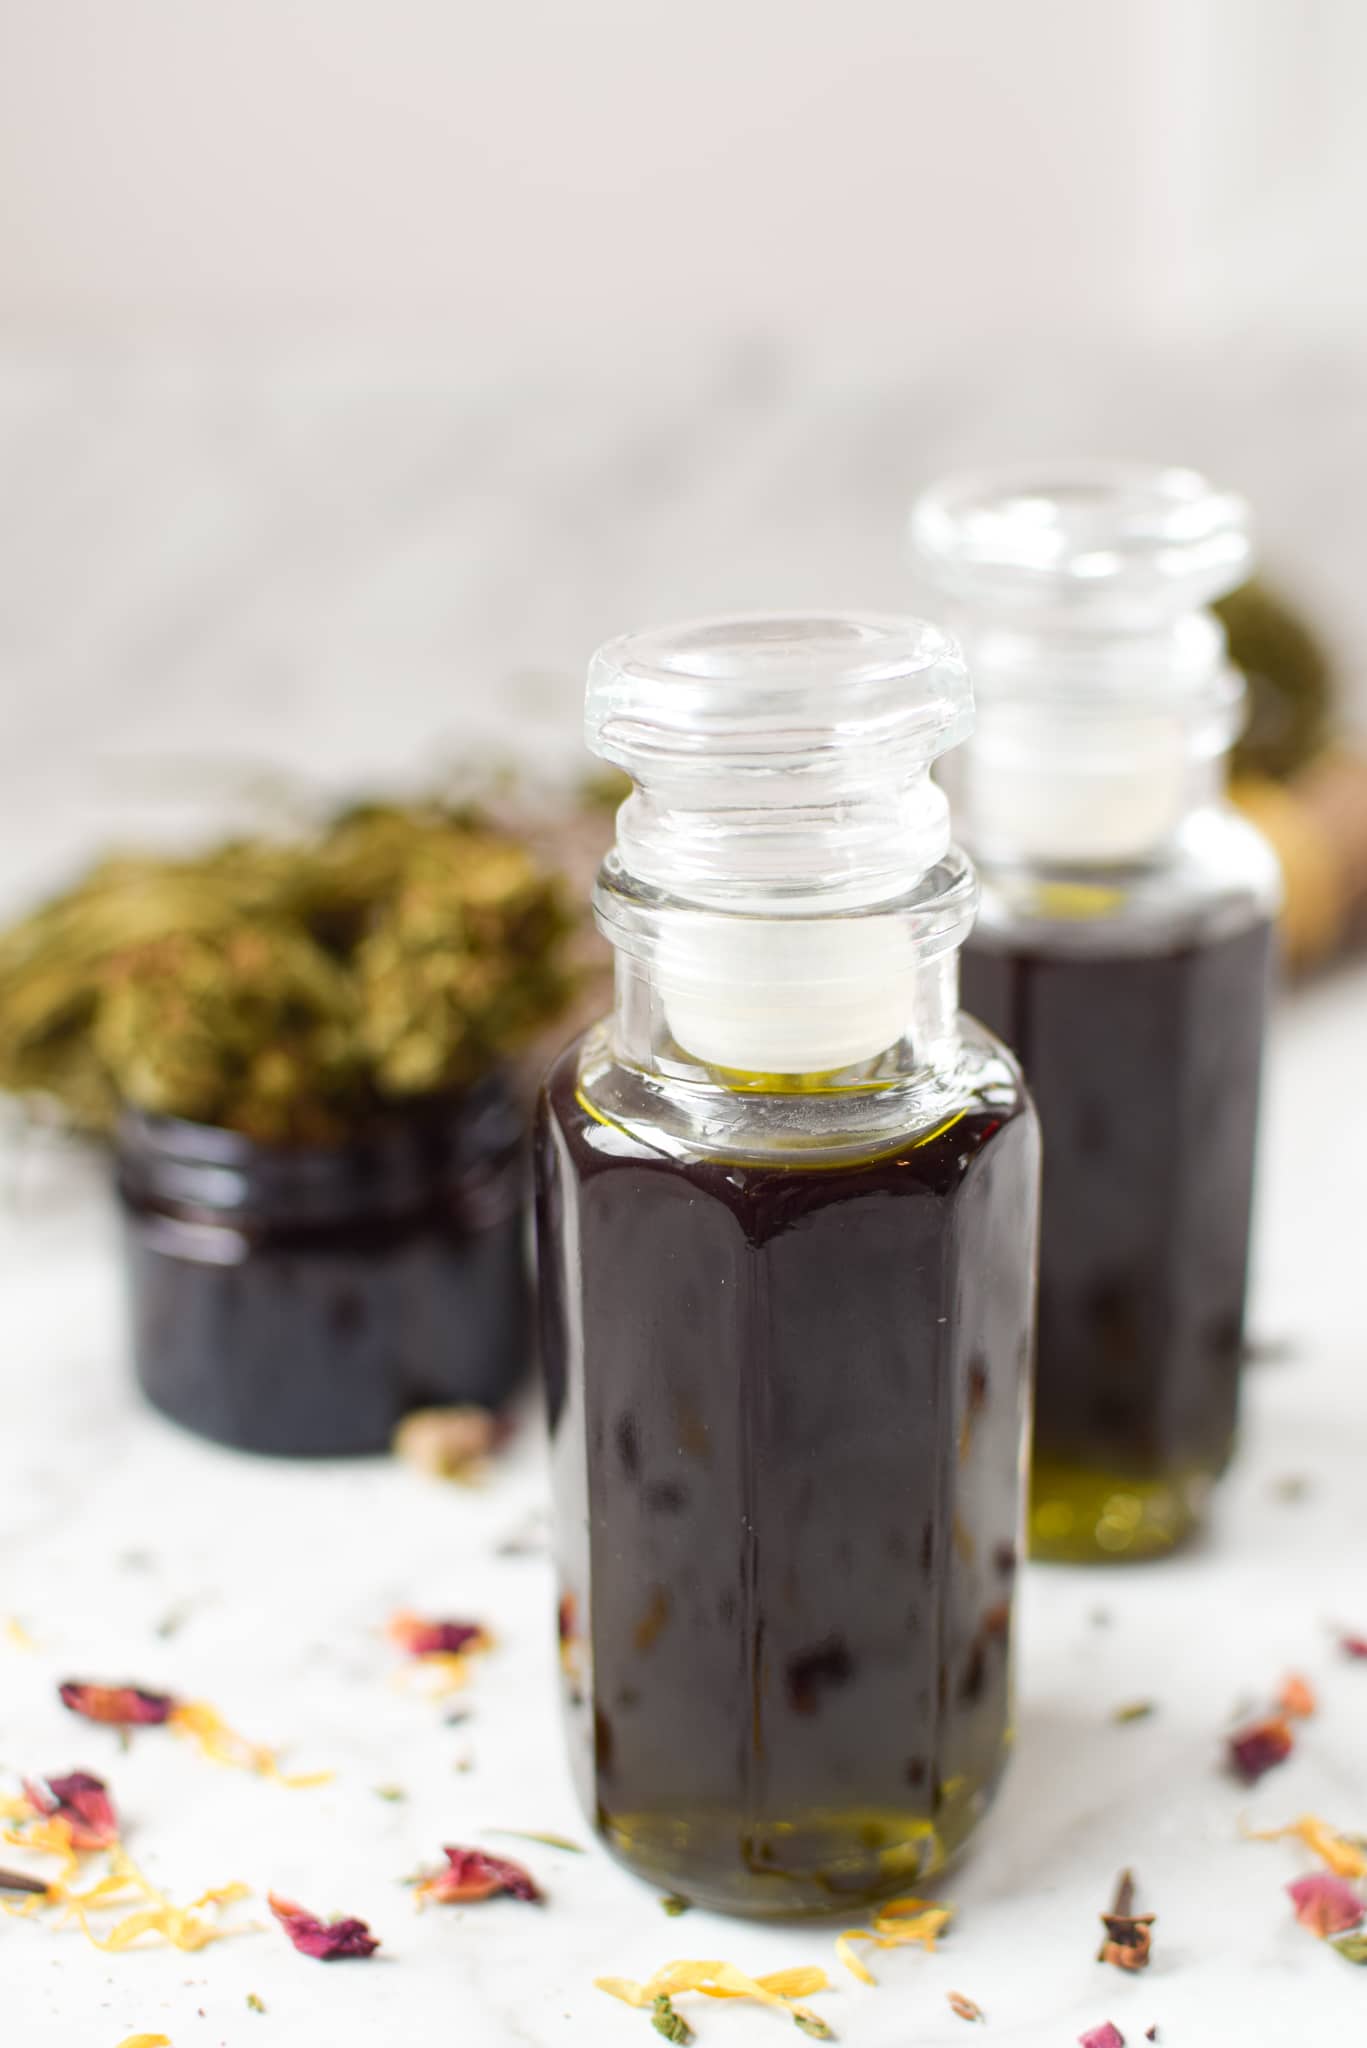 How to make cbd infused massage oil